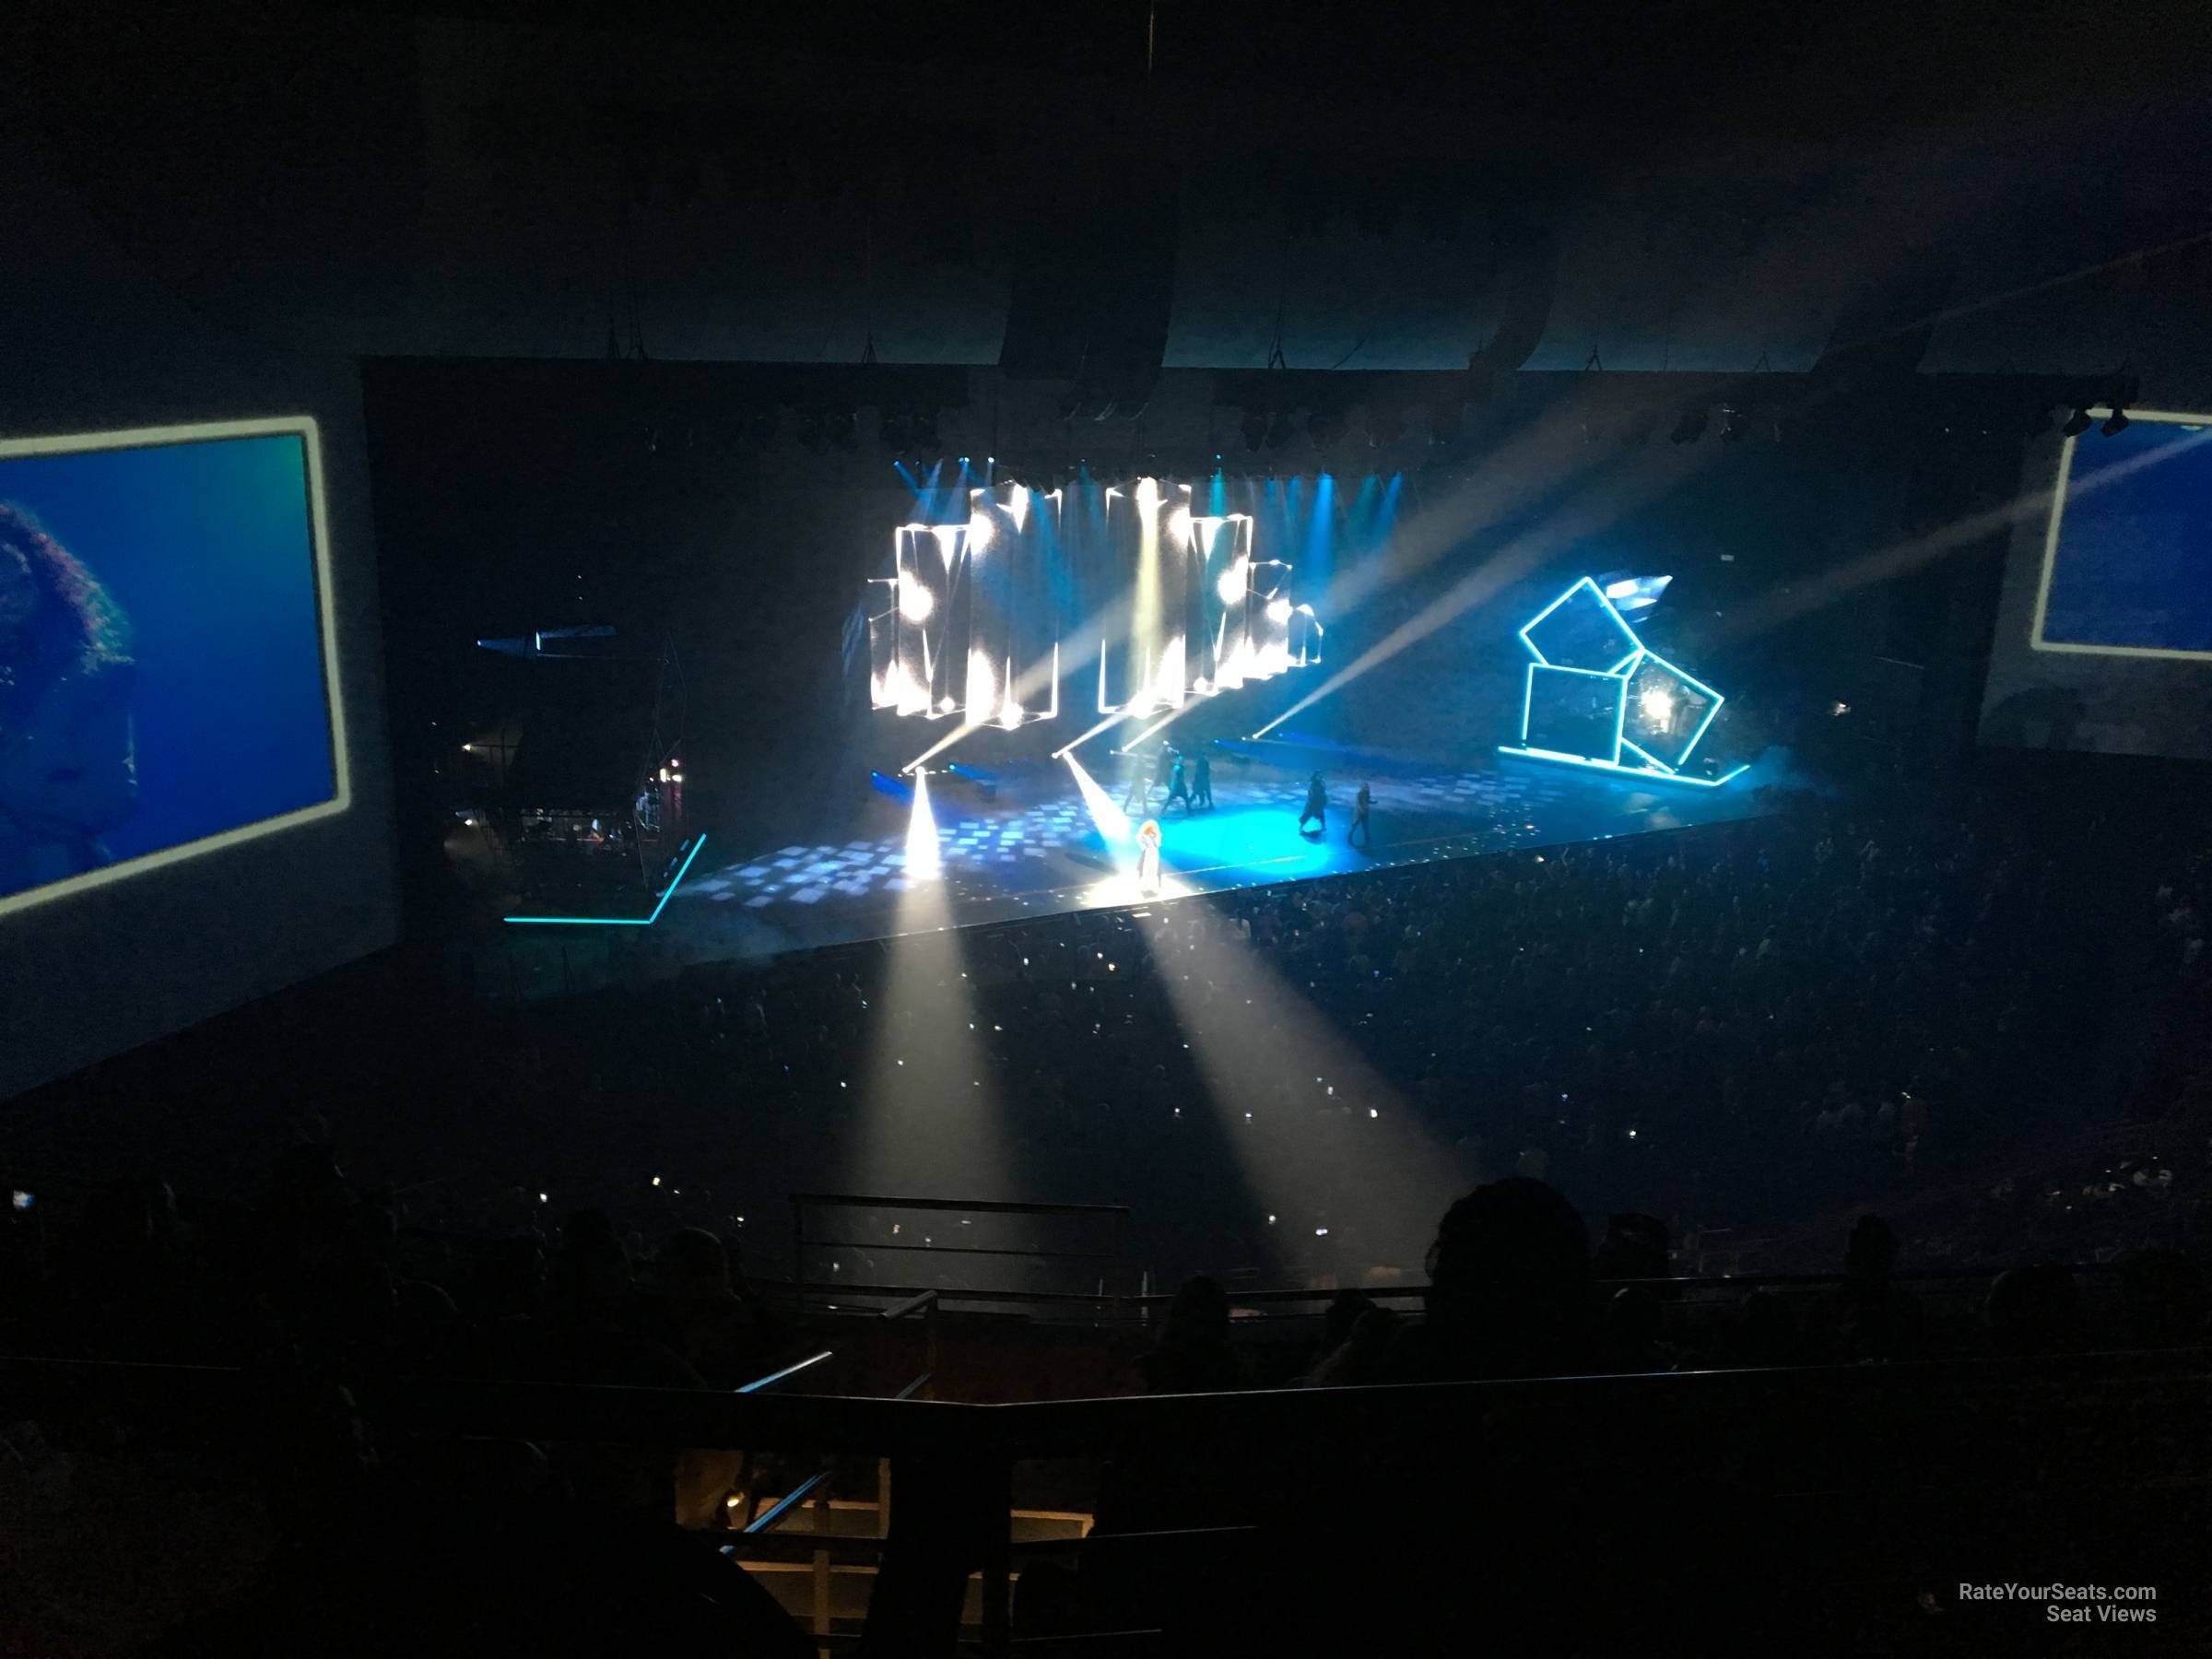 section 406, row f seat view  - dolby live at park mgm